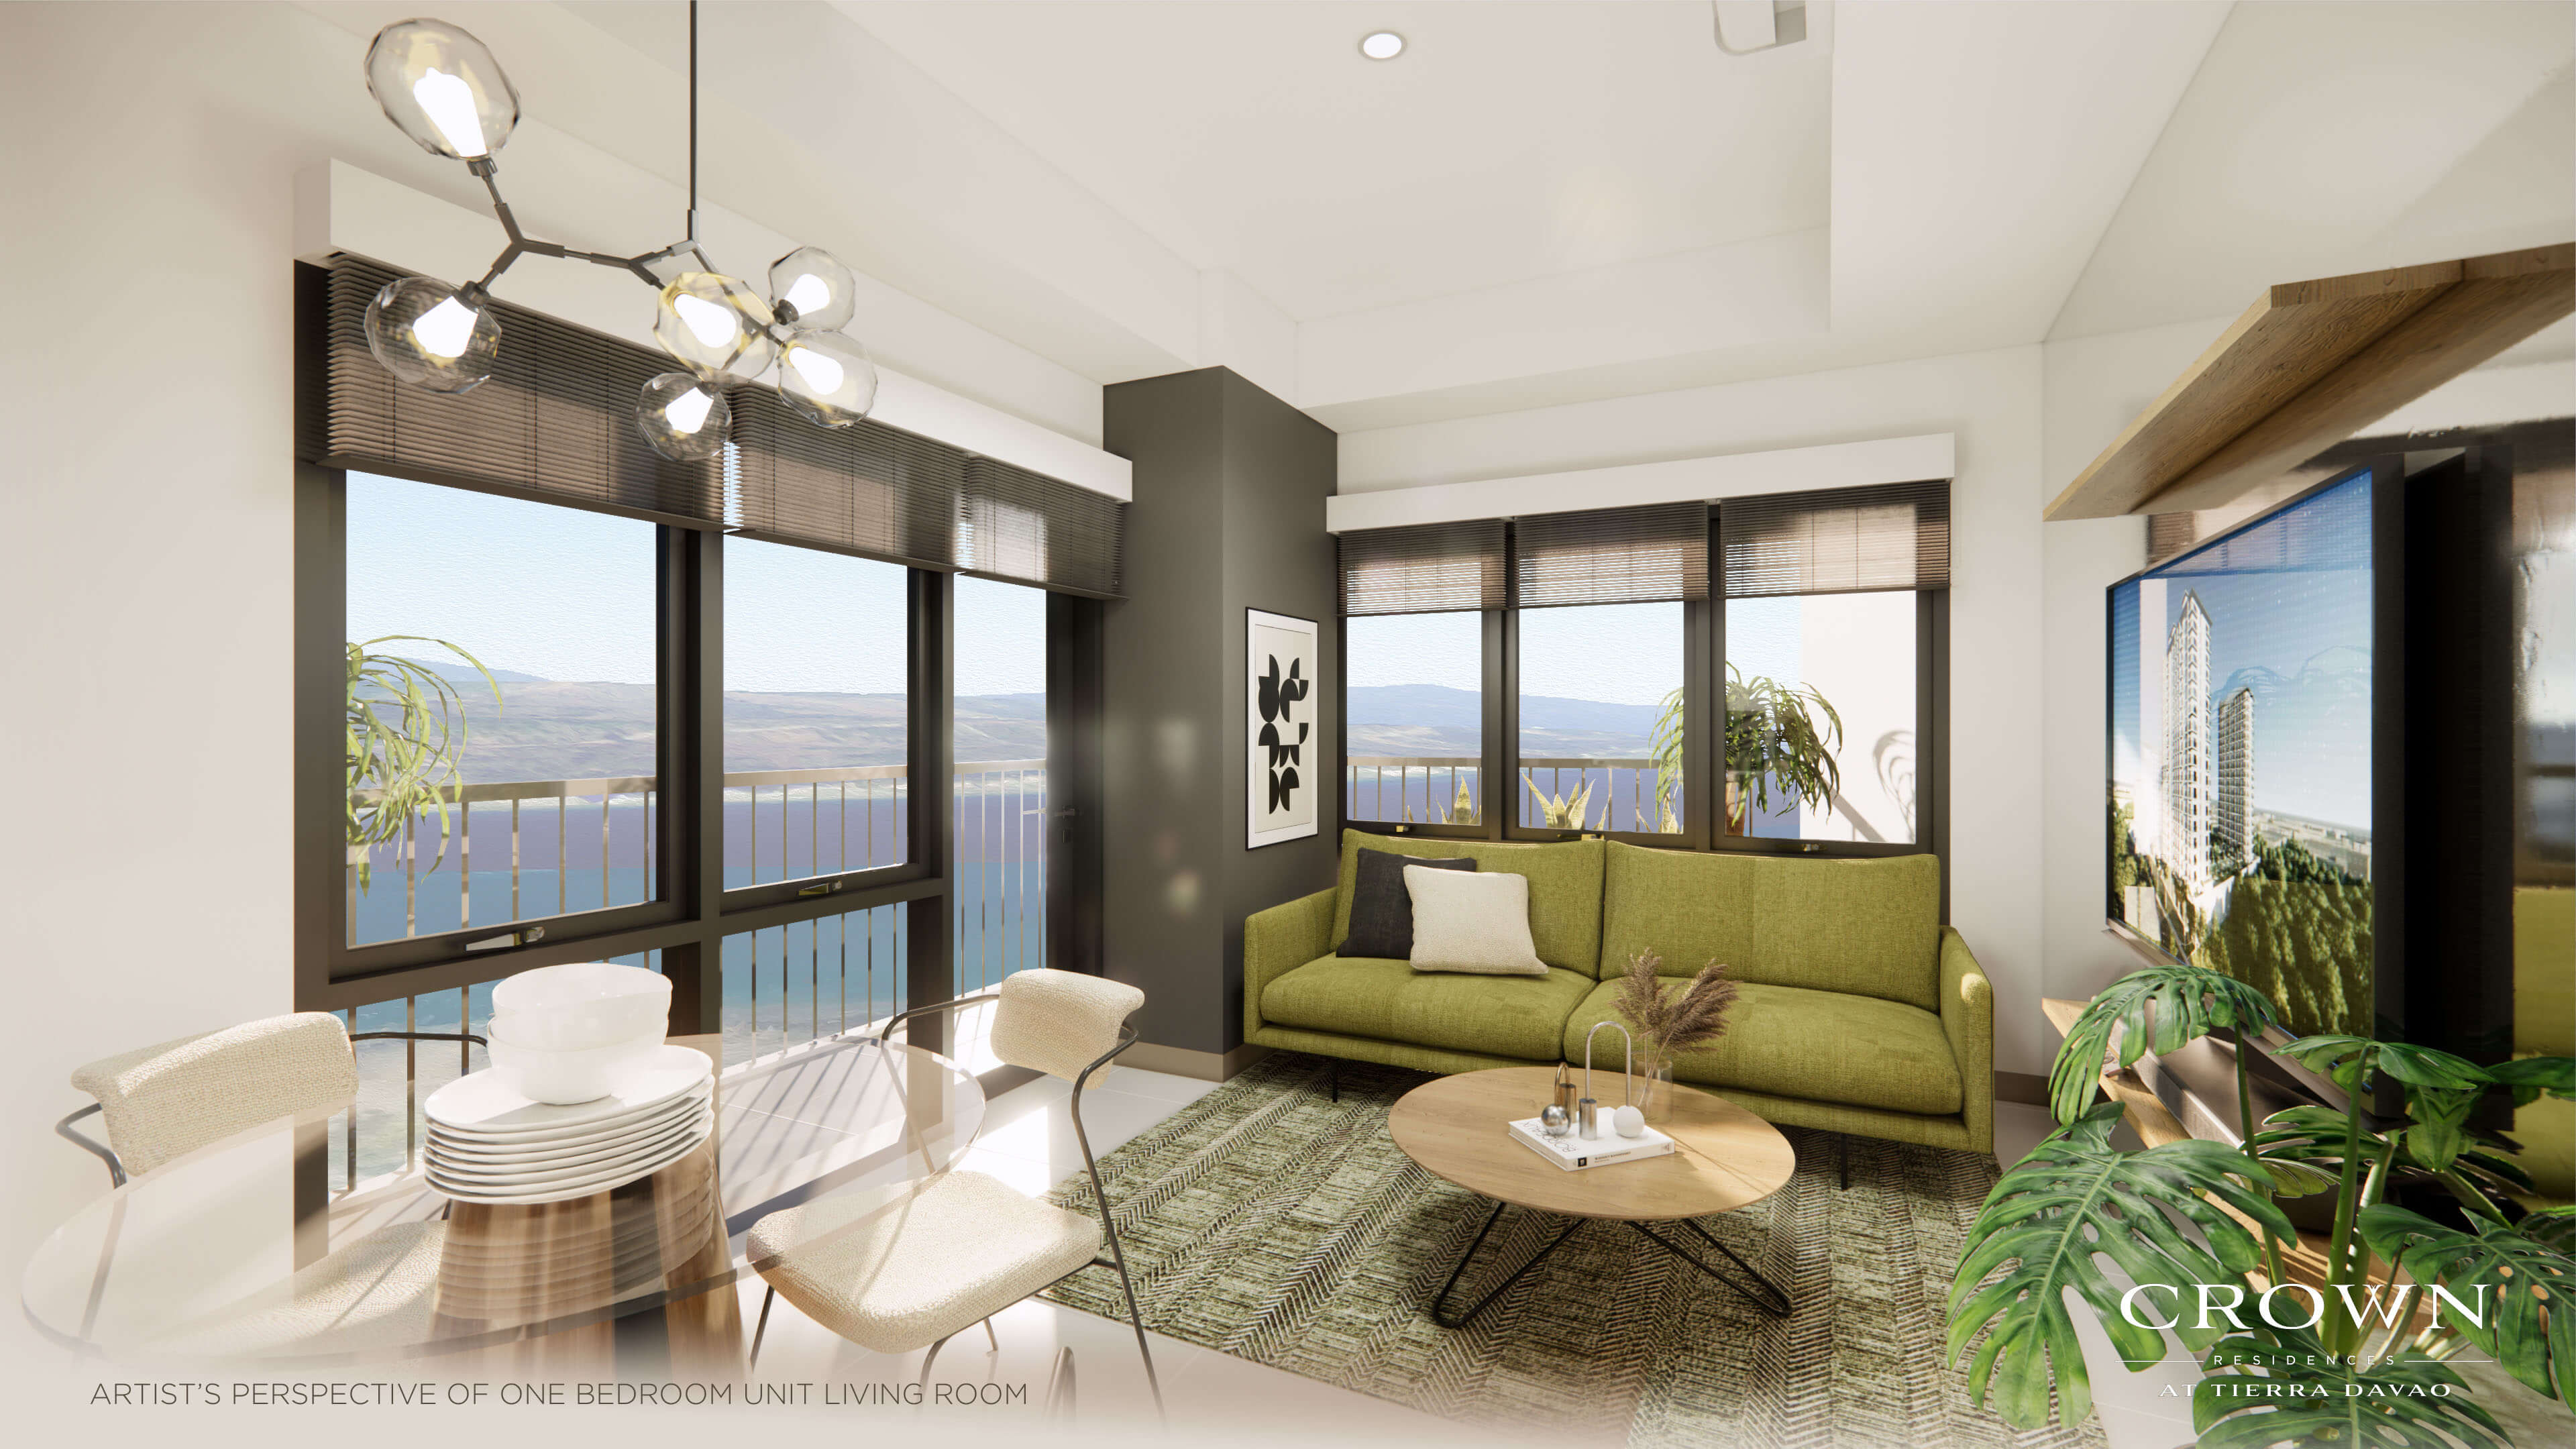 Crown Residences Artist's perspective of 1 BR unit living room